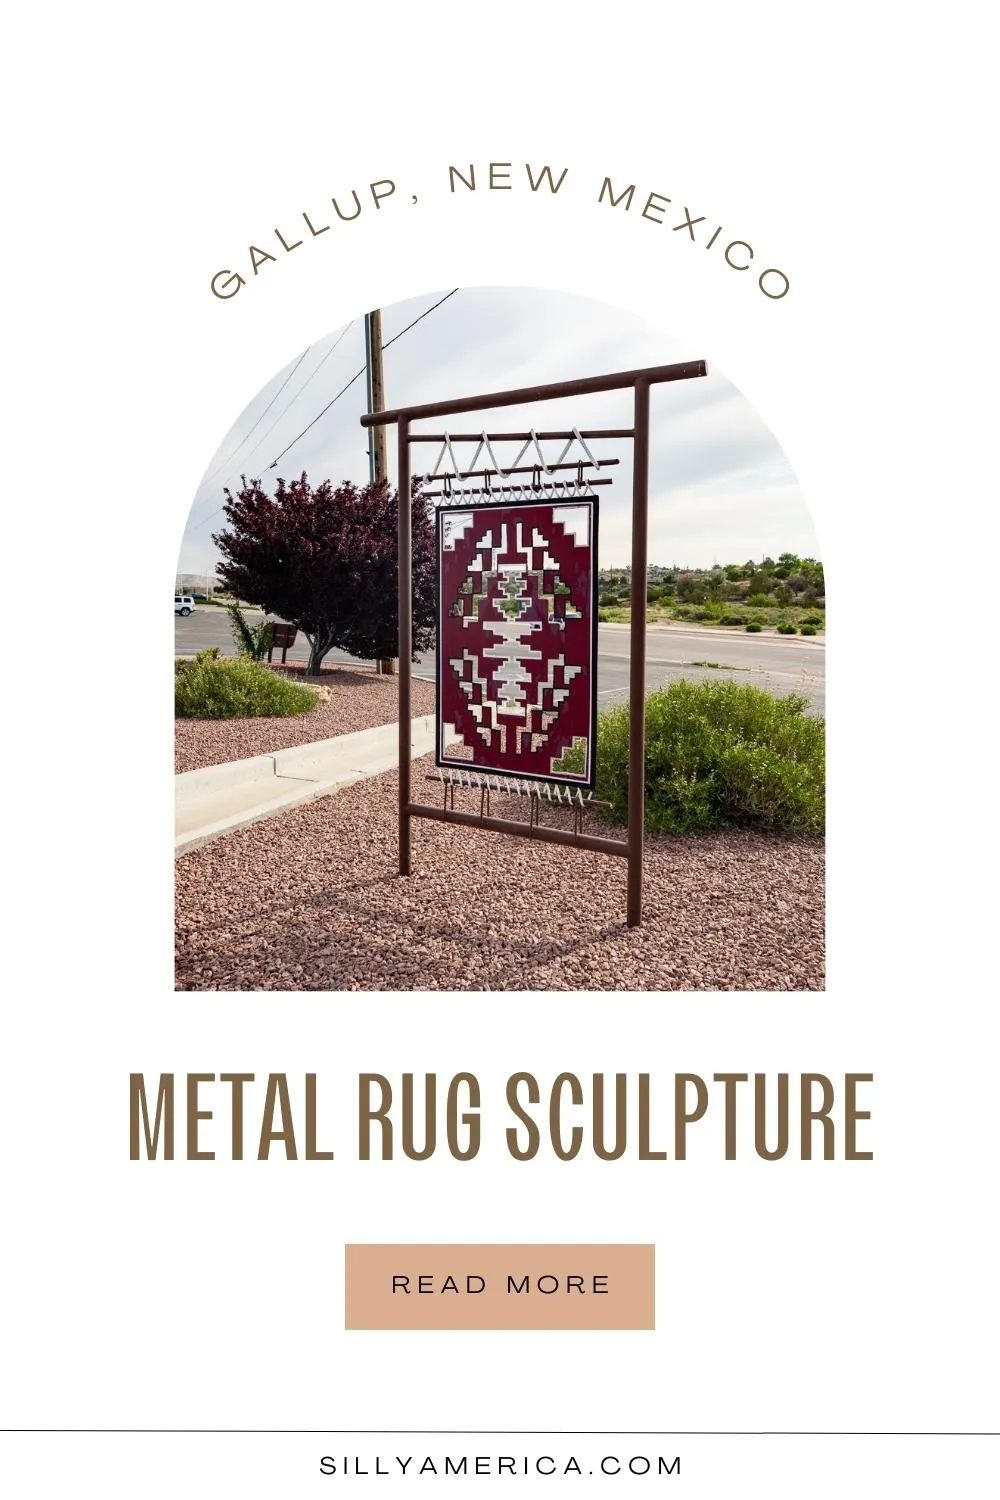 This metal rug sculpture is found in front of Perry Null Trading Company, a shop in Gallup, New Mexico that sells Native American jewelry, arts, and crafts. They specialize in silver and turquoise jewelry, pottery, carvings, and rugs. It was crafted by Navajo artist Leonardo Jim. Visit this Route 66 roadside attraction on your Route 66 road trip in New Mexico. Add it to your travel itinerary. #Route66 #Route66RoadTrip